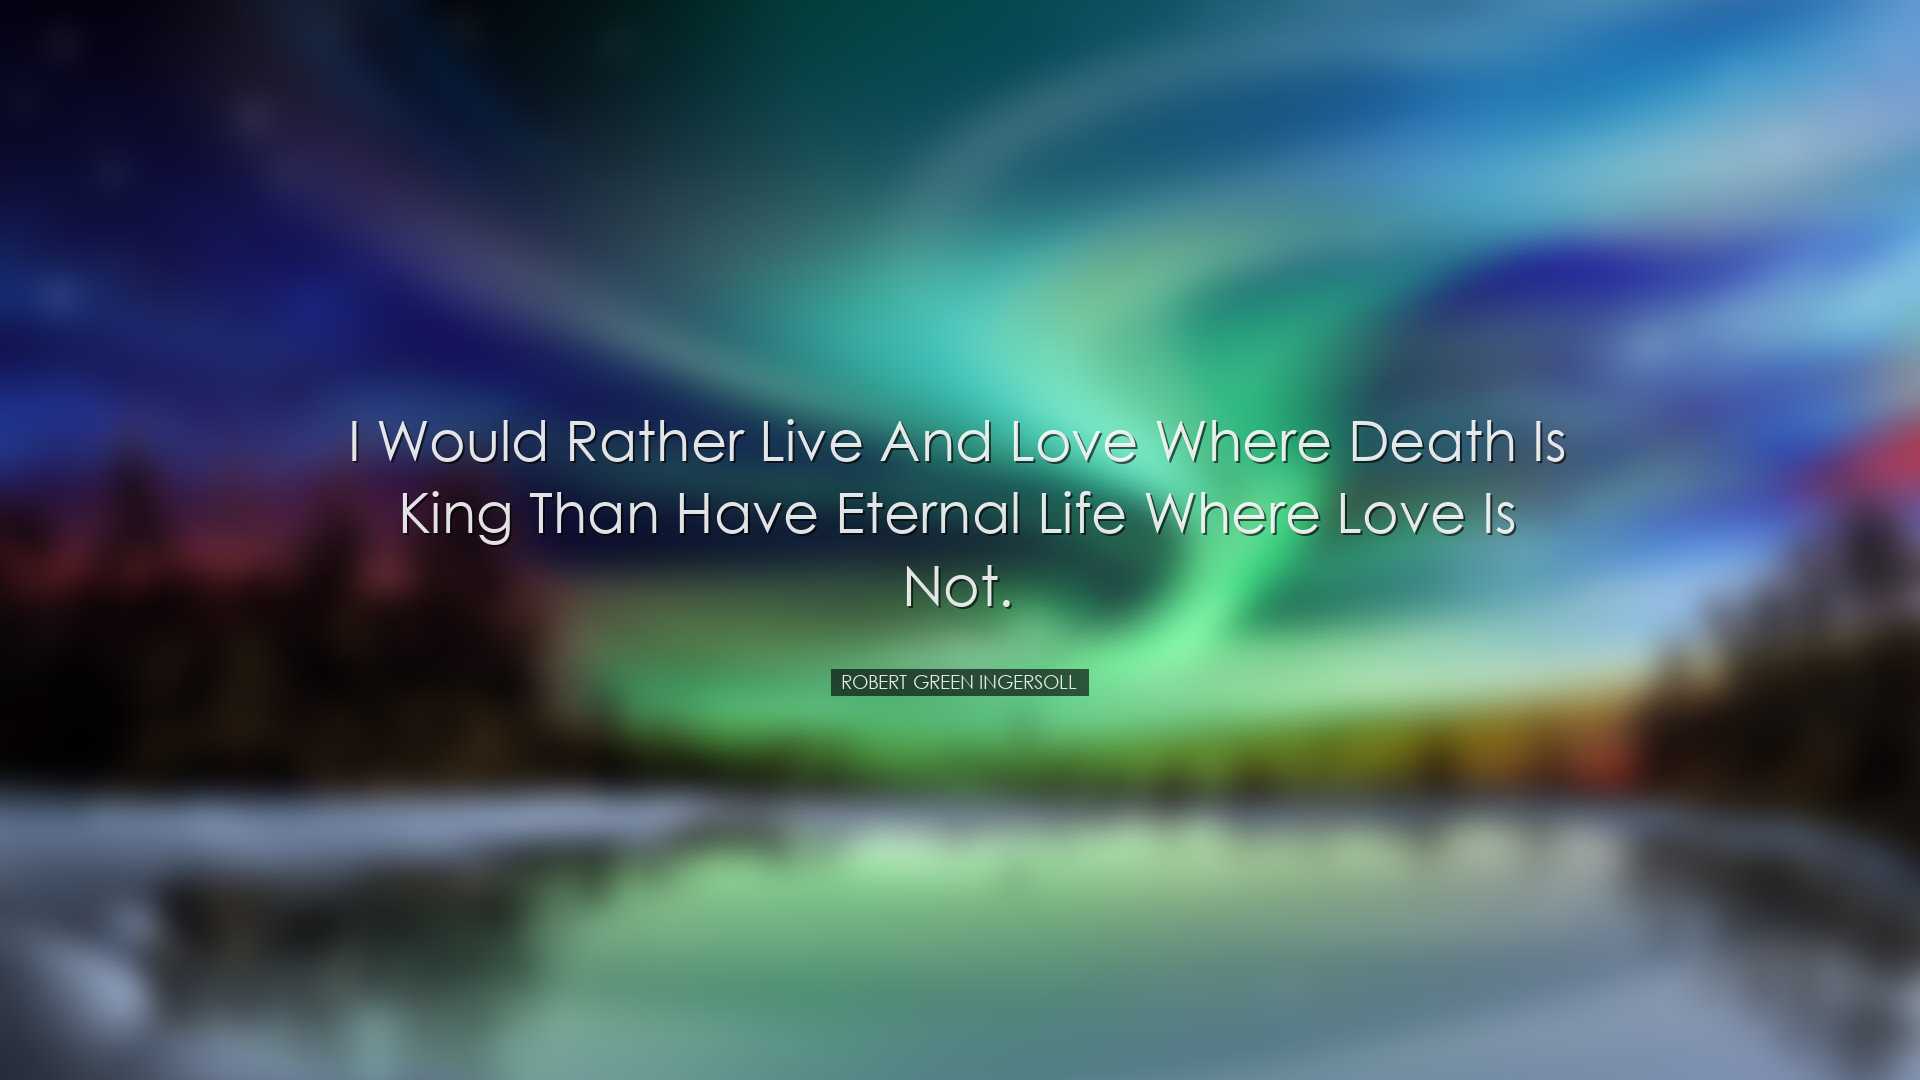 I would rather live and love where death is king than have eternal